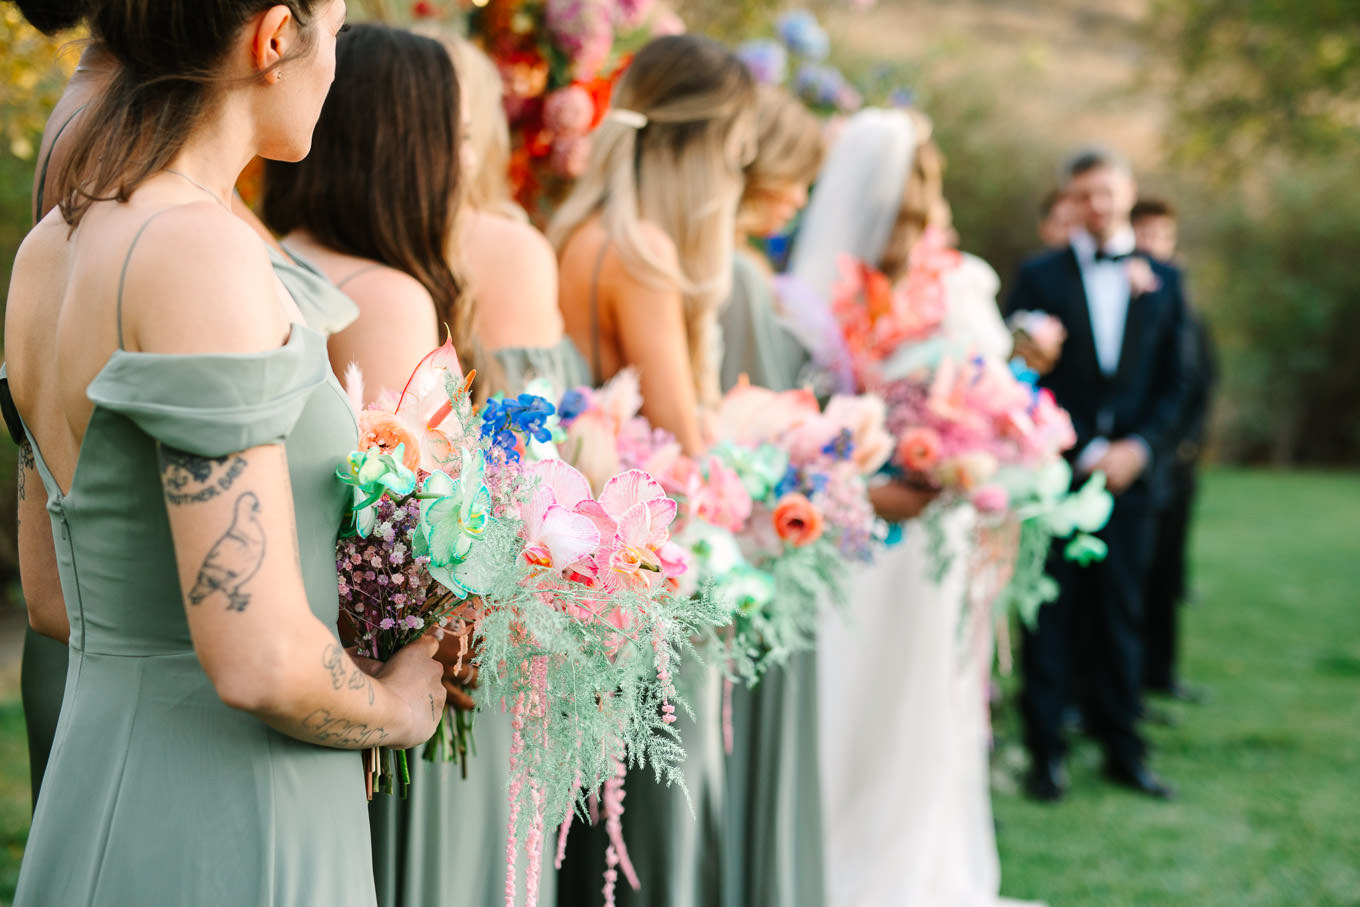 Colorful bridesmaid bouquets during ceremony | Colorful and quirky wedding at Higuera Ranch in San Luis Obispo | #sanluisobispowedding #californiawedding #higueraranch #madonnainn   
Source: Mary Costa Photography | Los Angeles